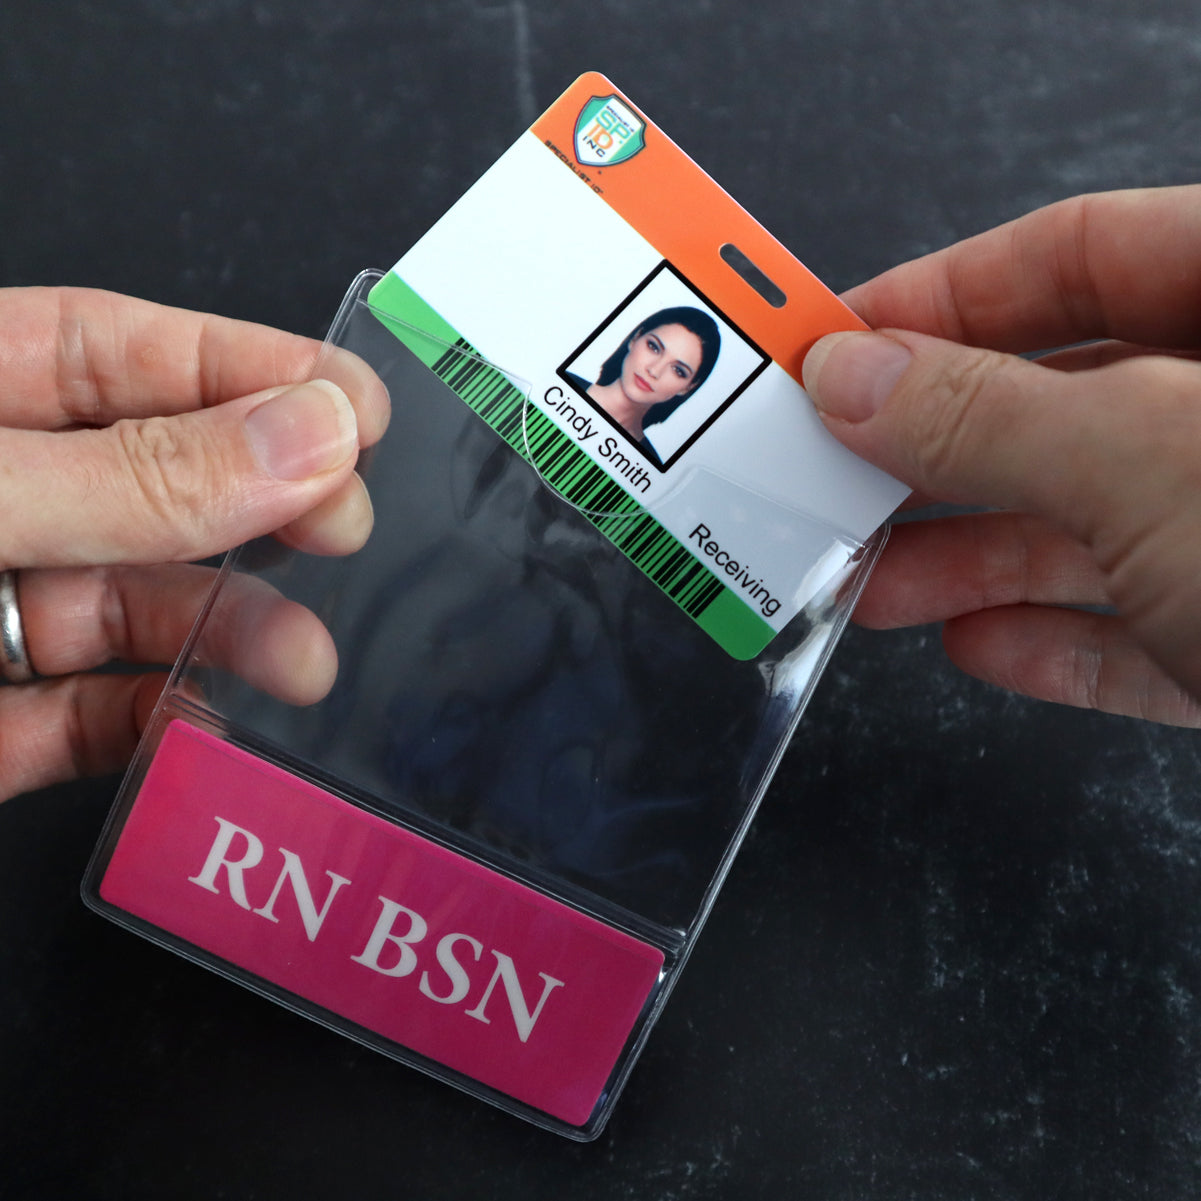 Hands holding an ID badge with a photo, the name "Cindy Smith," and the text "Receiving." Below, a label with "RN BSN" is visible. The customizable title feature and durable Custom Printed BadgeBottoms® Horizontal (Badge Holder & Badge Buddy IN ONE) complete this professional look.